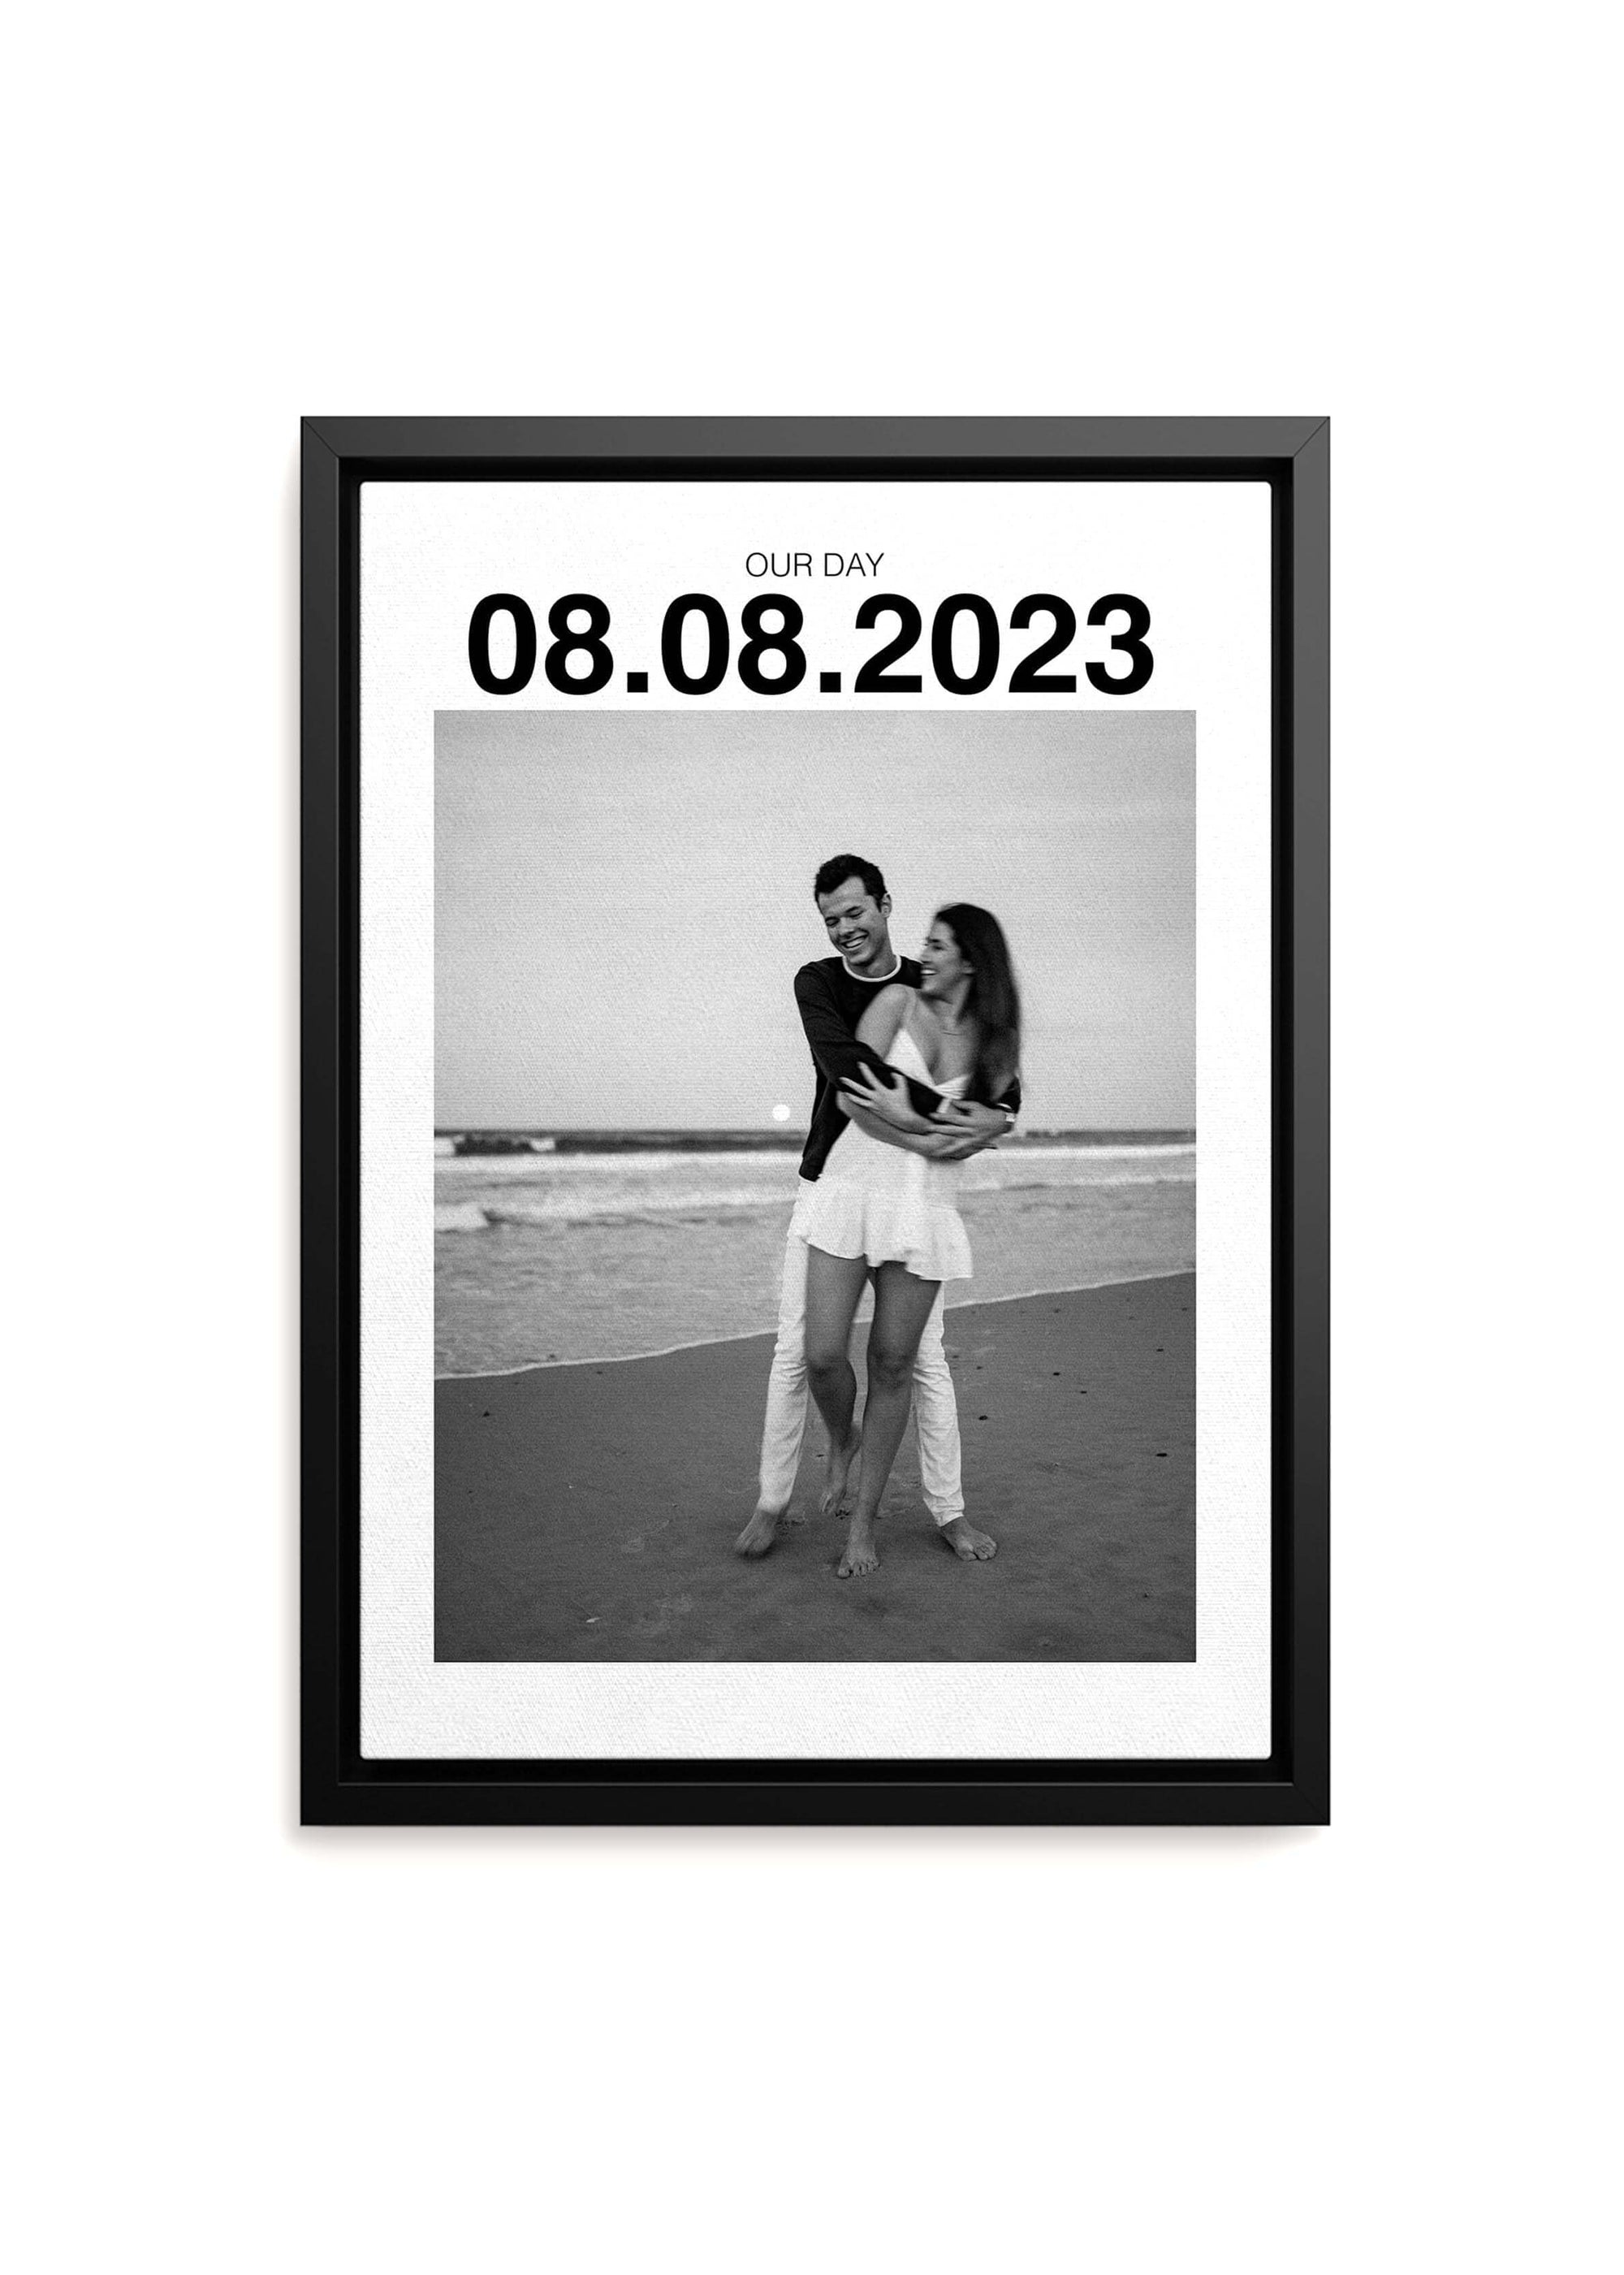 Personalized anniversary gift canvas with large custom date on black framed canvas and a couple on the beach smiling in black and white. Canvas is on a white background.